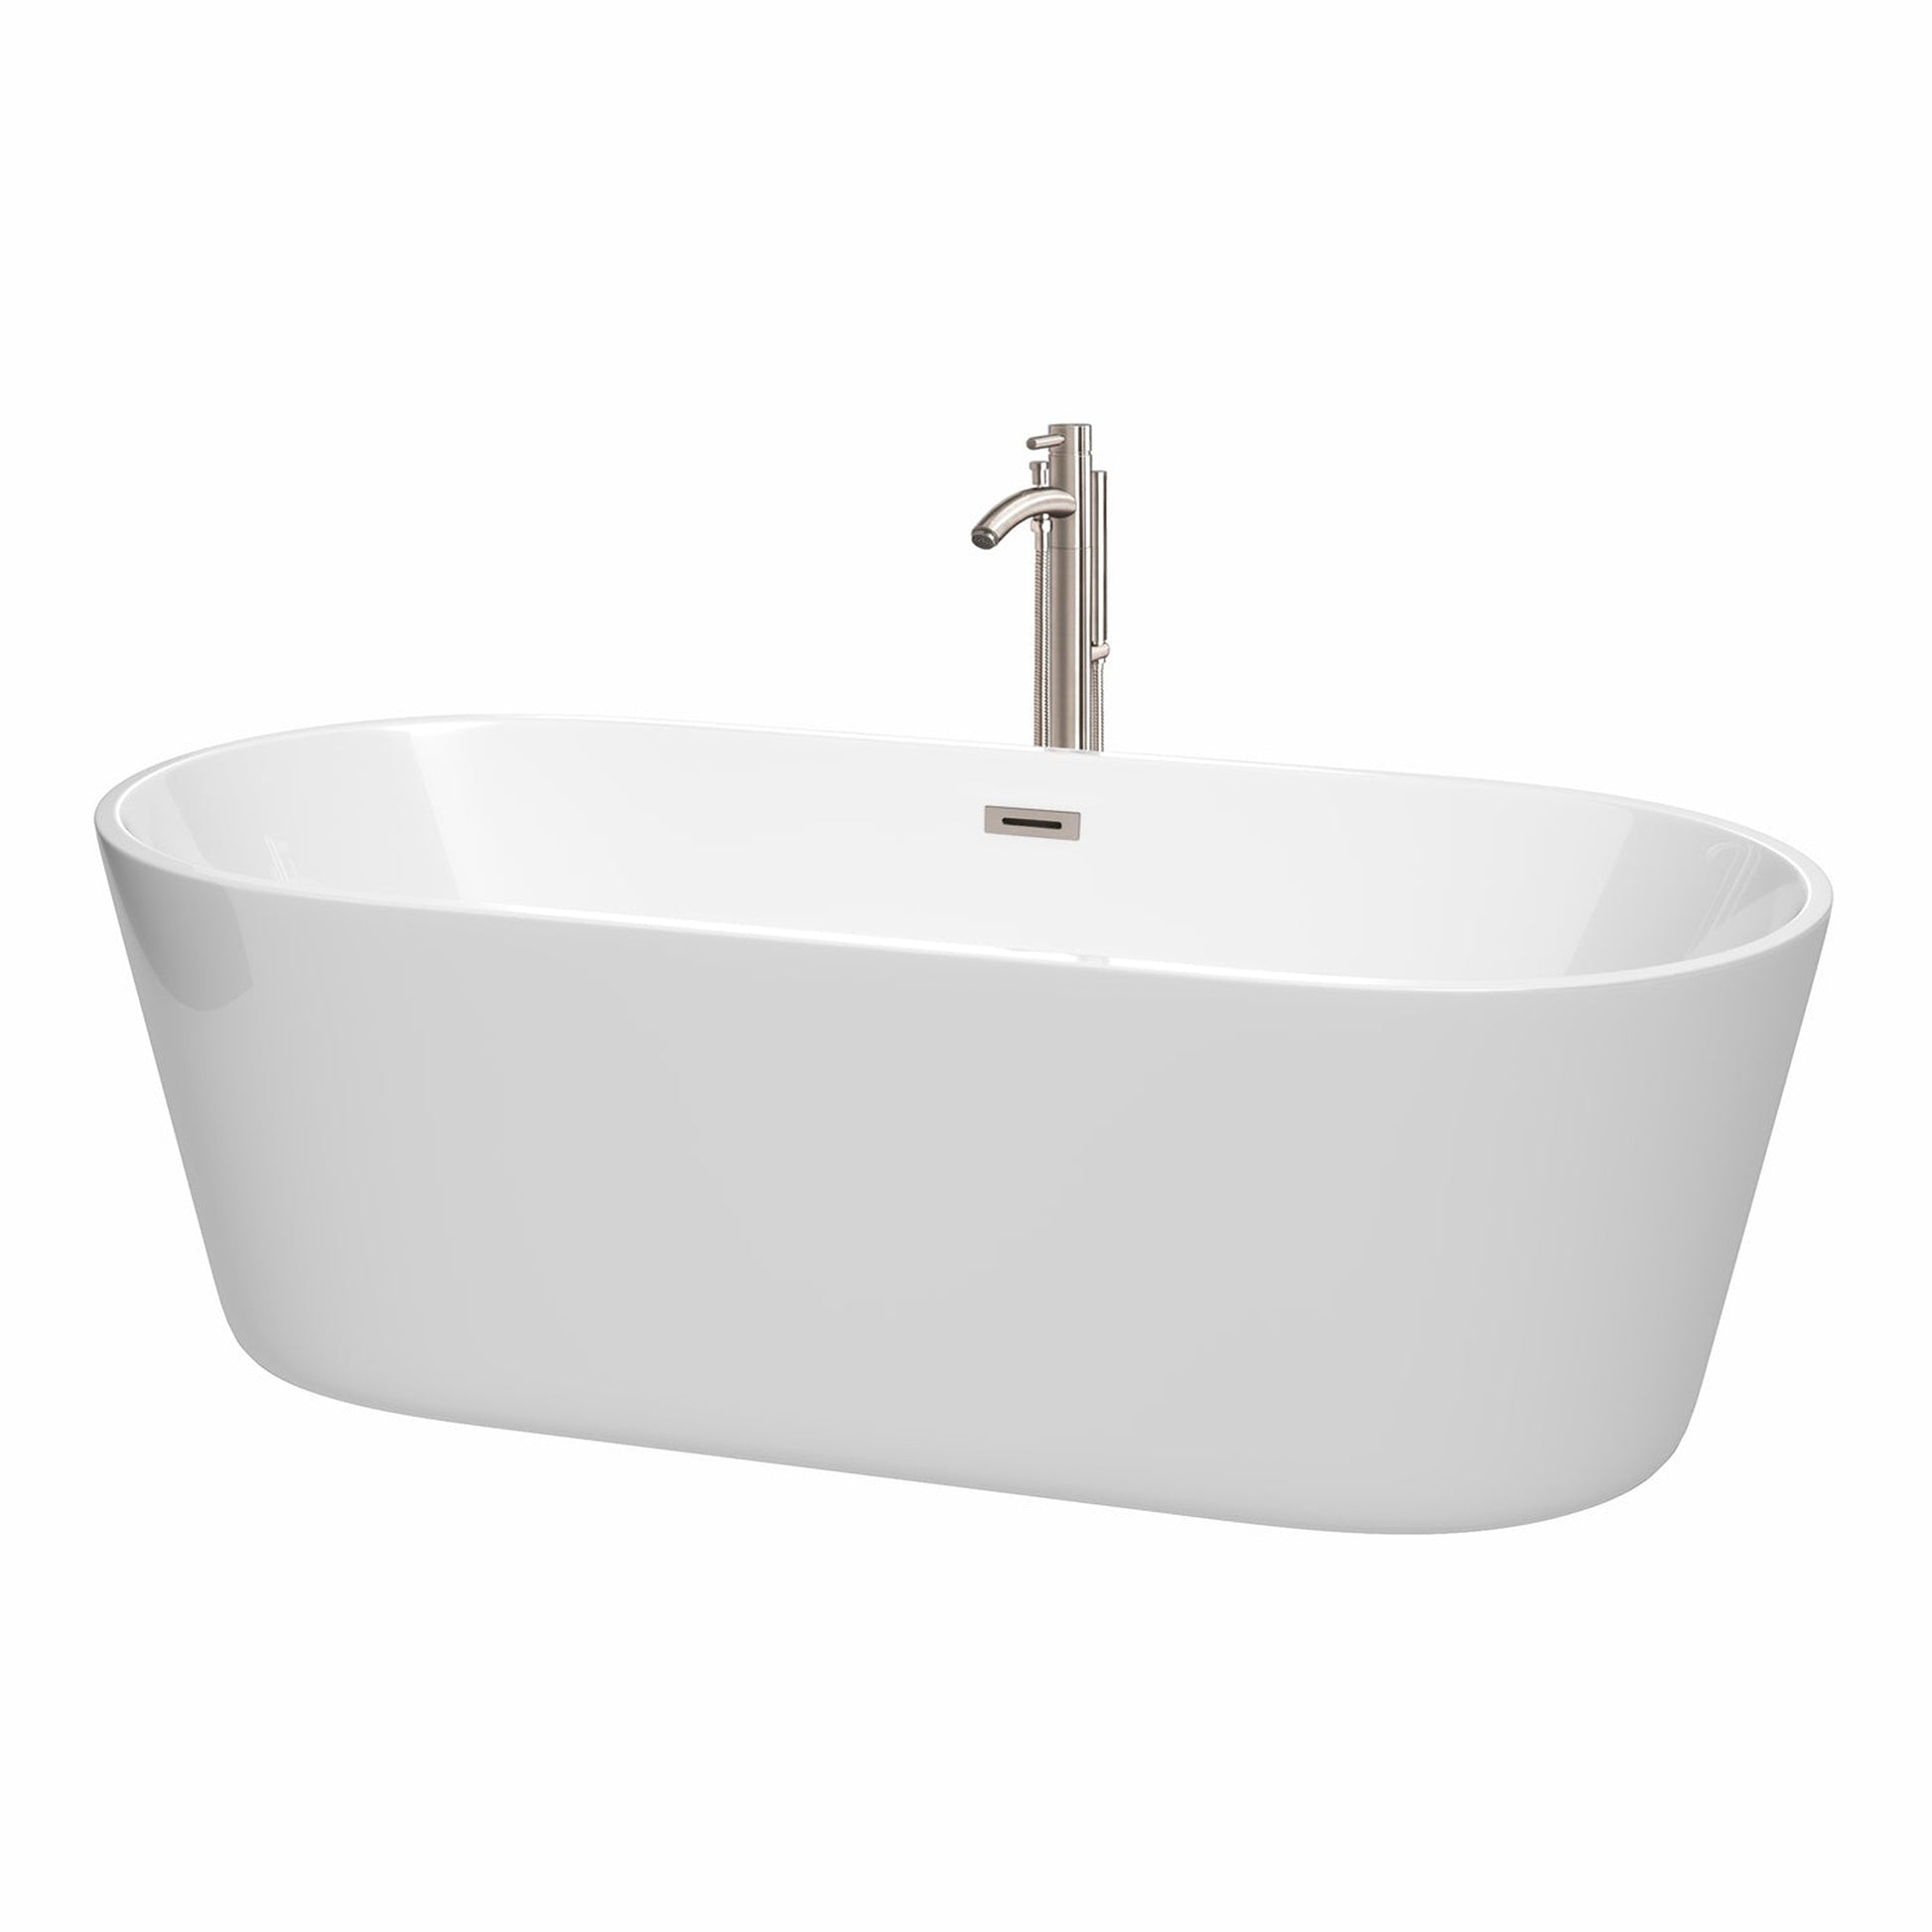 Wyndham Collection Carissa 71" Freestanding Bathtub in White With Floor Mounted Faucet, Drain and Overflow Trim in Brushed Nickel